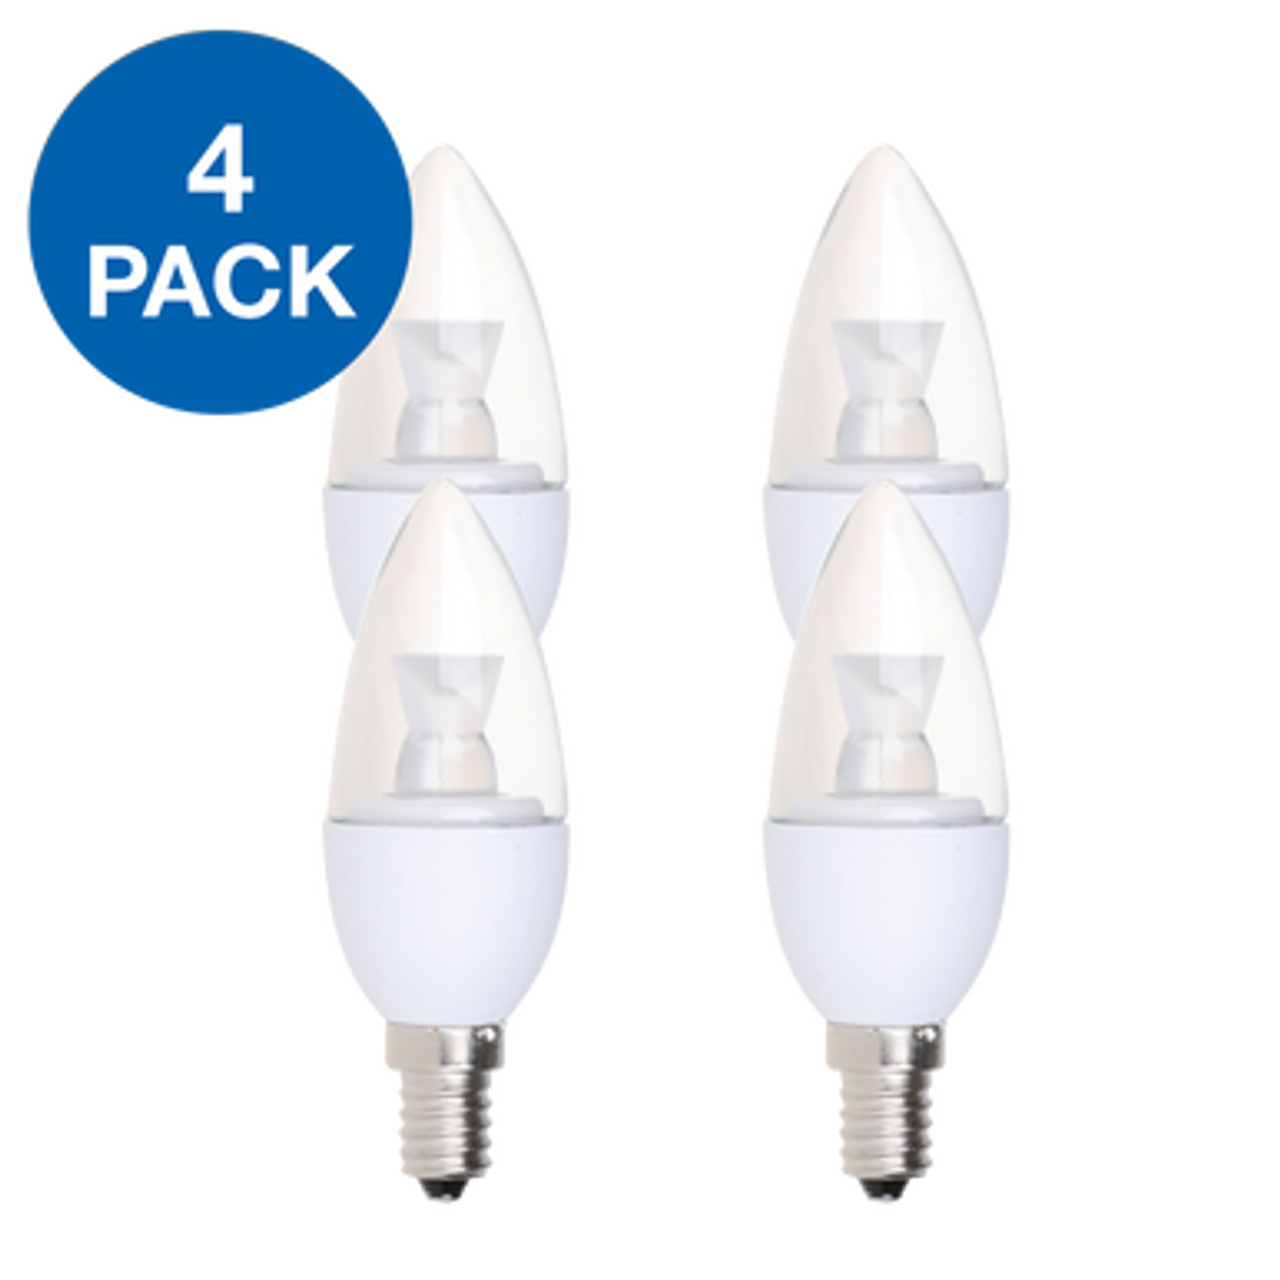 4 Pack Frosted Candelabra LED Bulbs